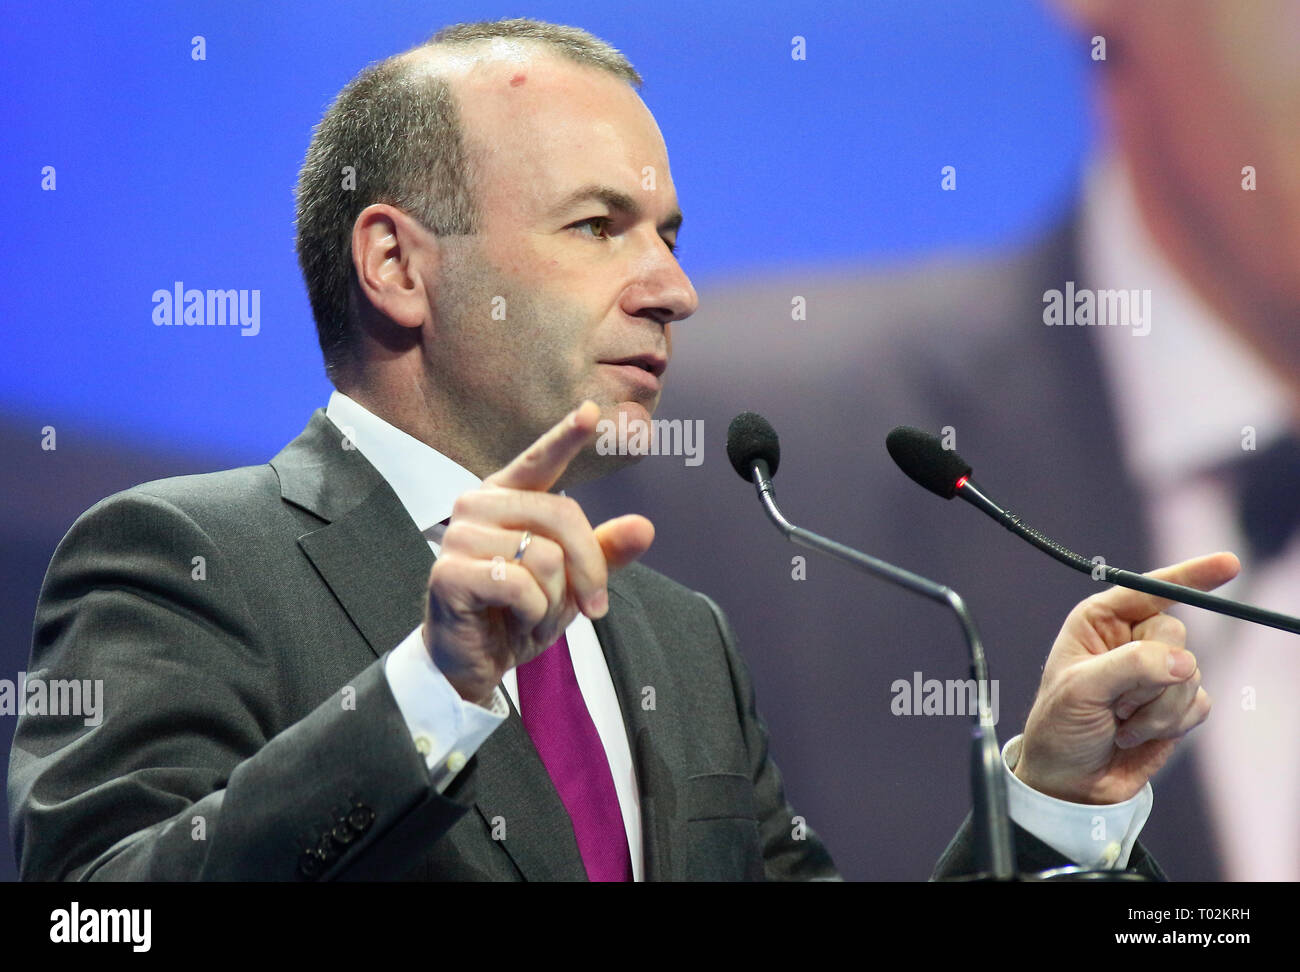 Bucharest, Romania - March 16, 2019: Manfred Weber, the EPP candidate for the President of the European Commission, speaks at the European People's Party summit, held in Bucharest. Credit: lcv/Alamy Live News Stock Photo